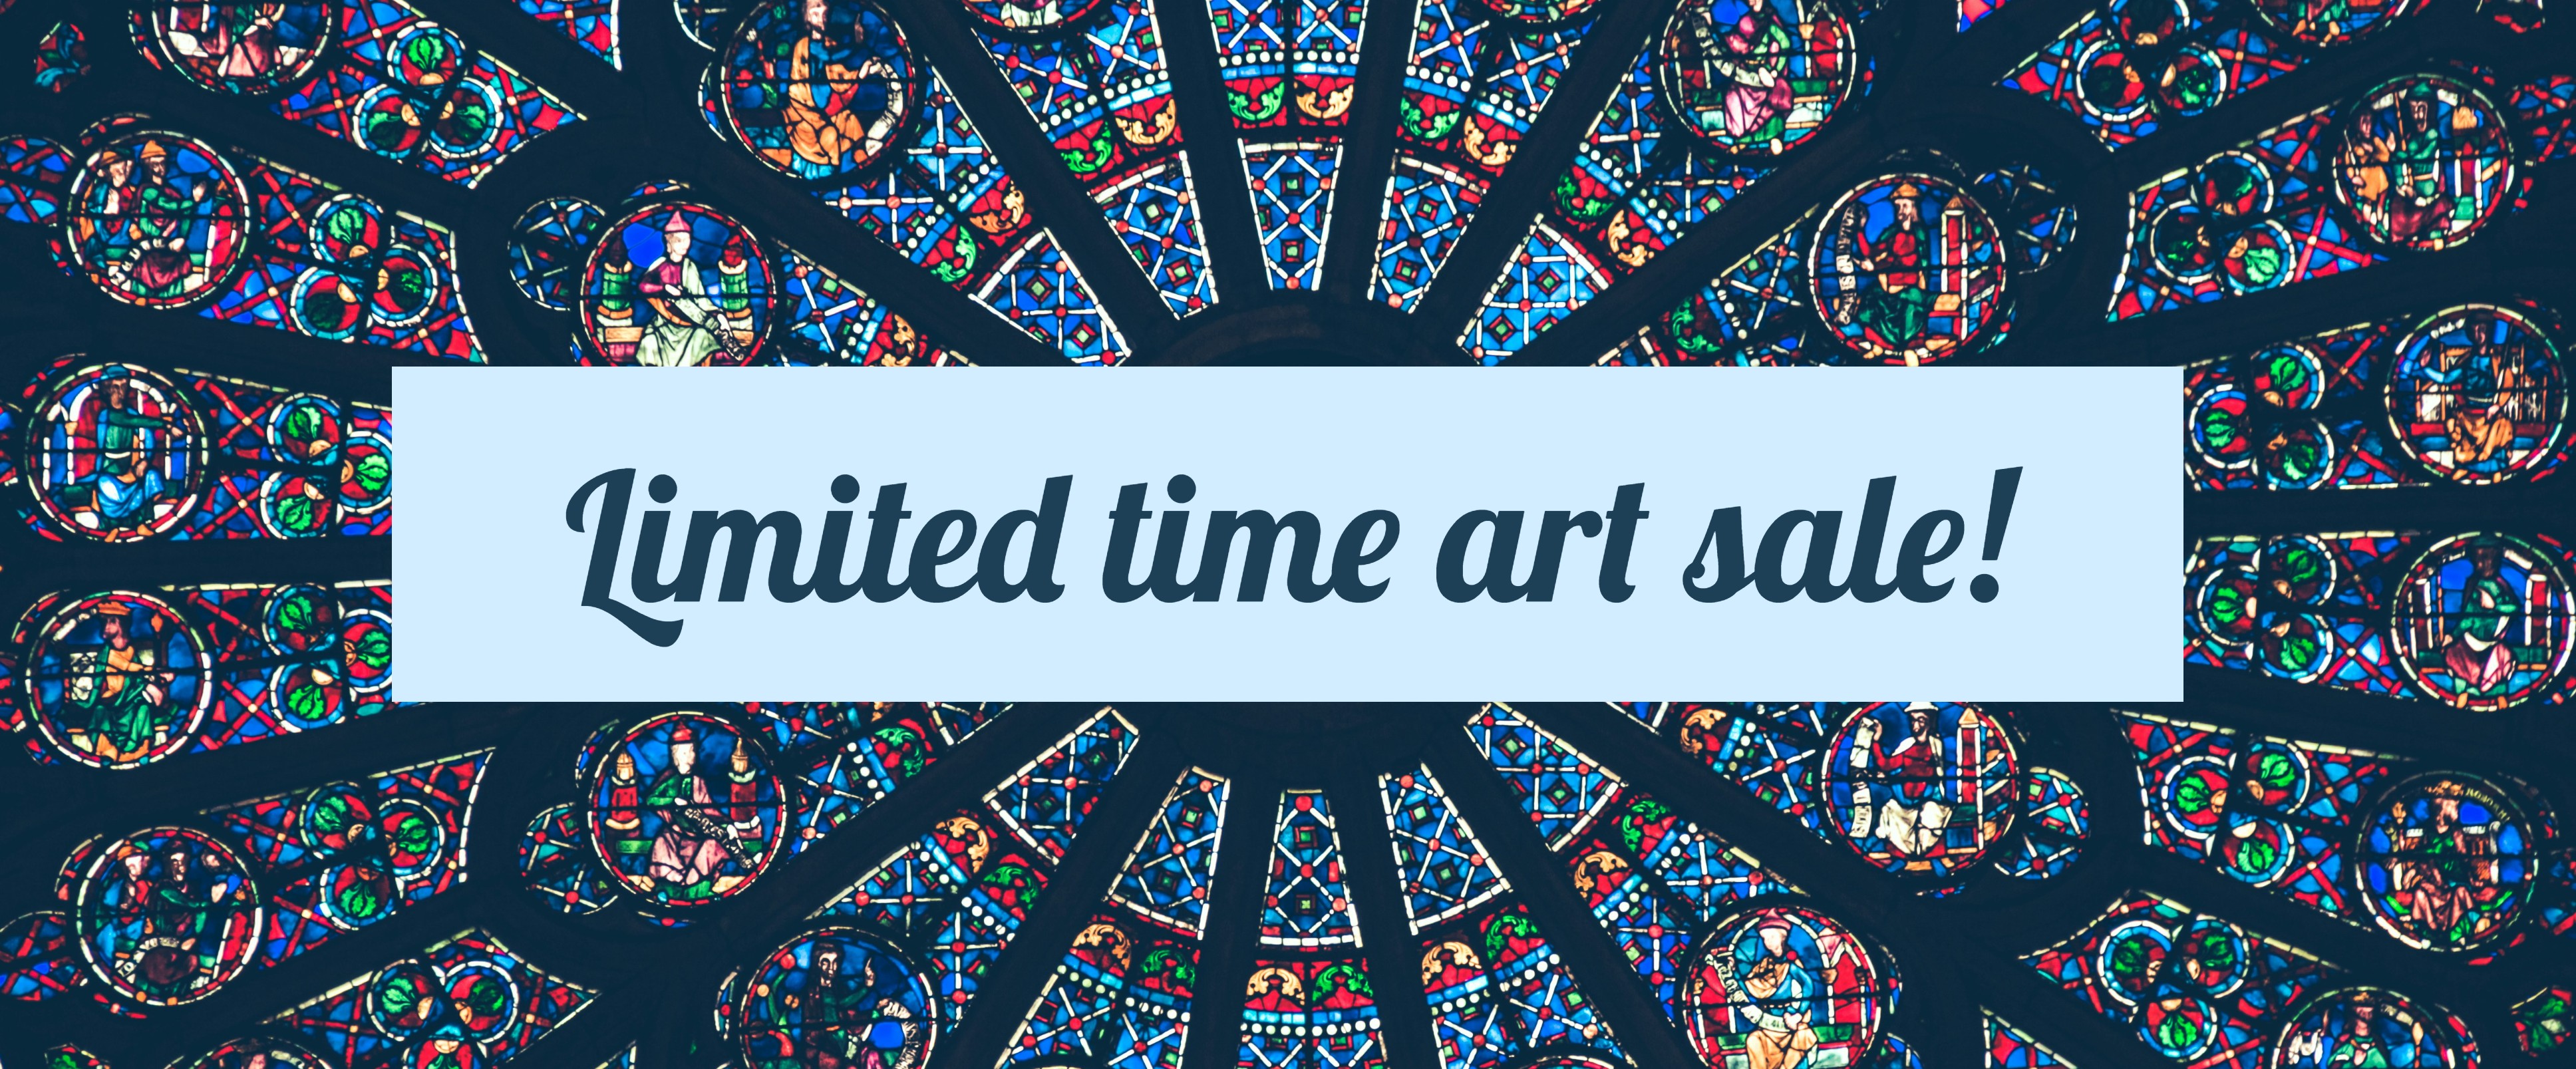 Limited time art sale!